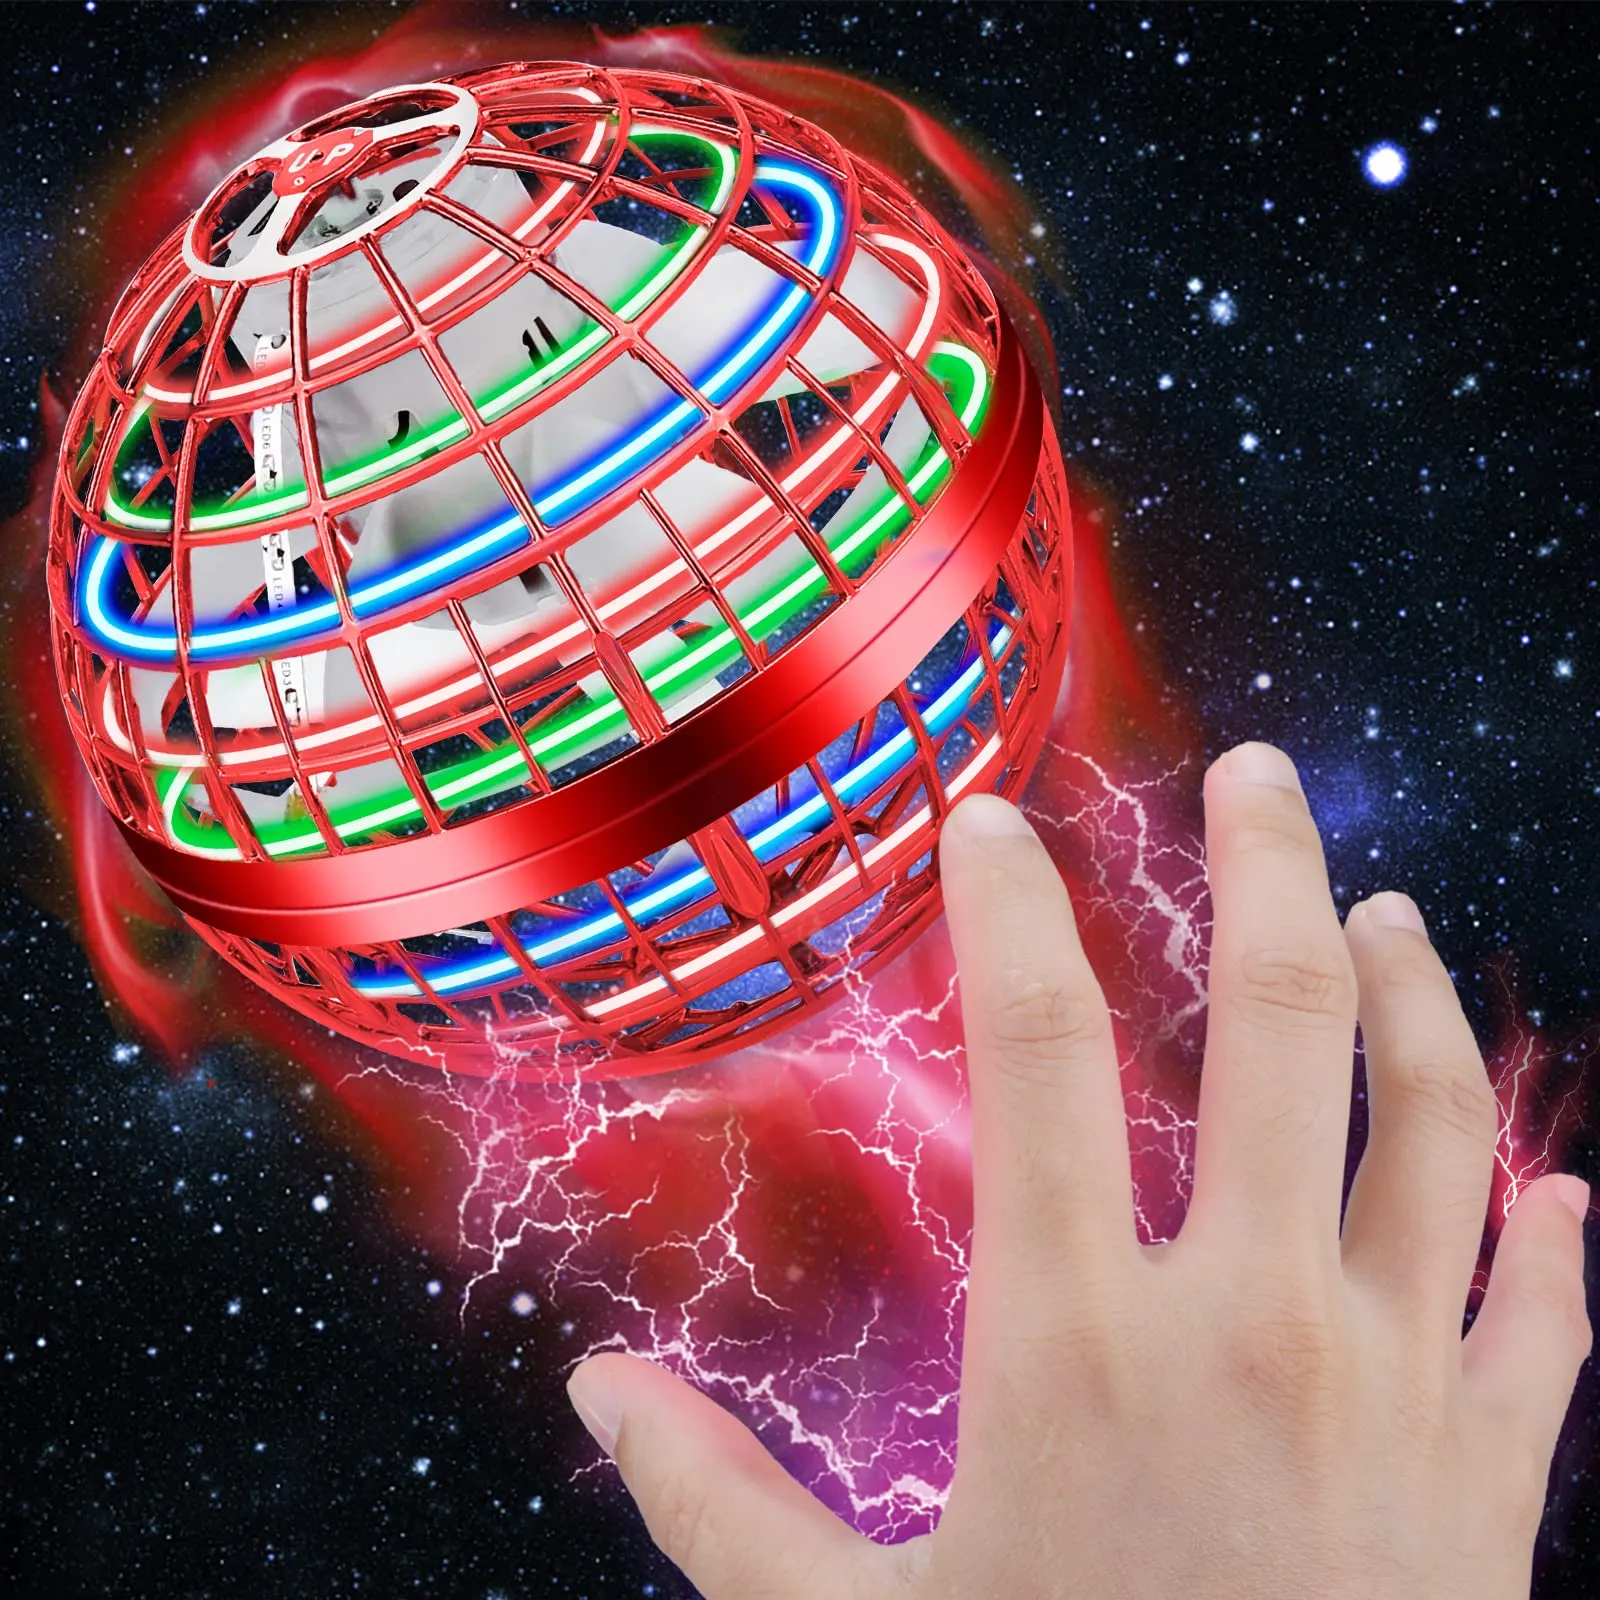 magic flying orb ball toy2022 upgraded space pro cool hover ball toy with rgb lights spinning 360ﾰ gifts for kids adults outdoor indoor games mini boomerang ufo dronewhite